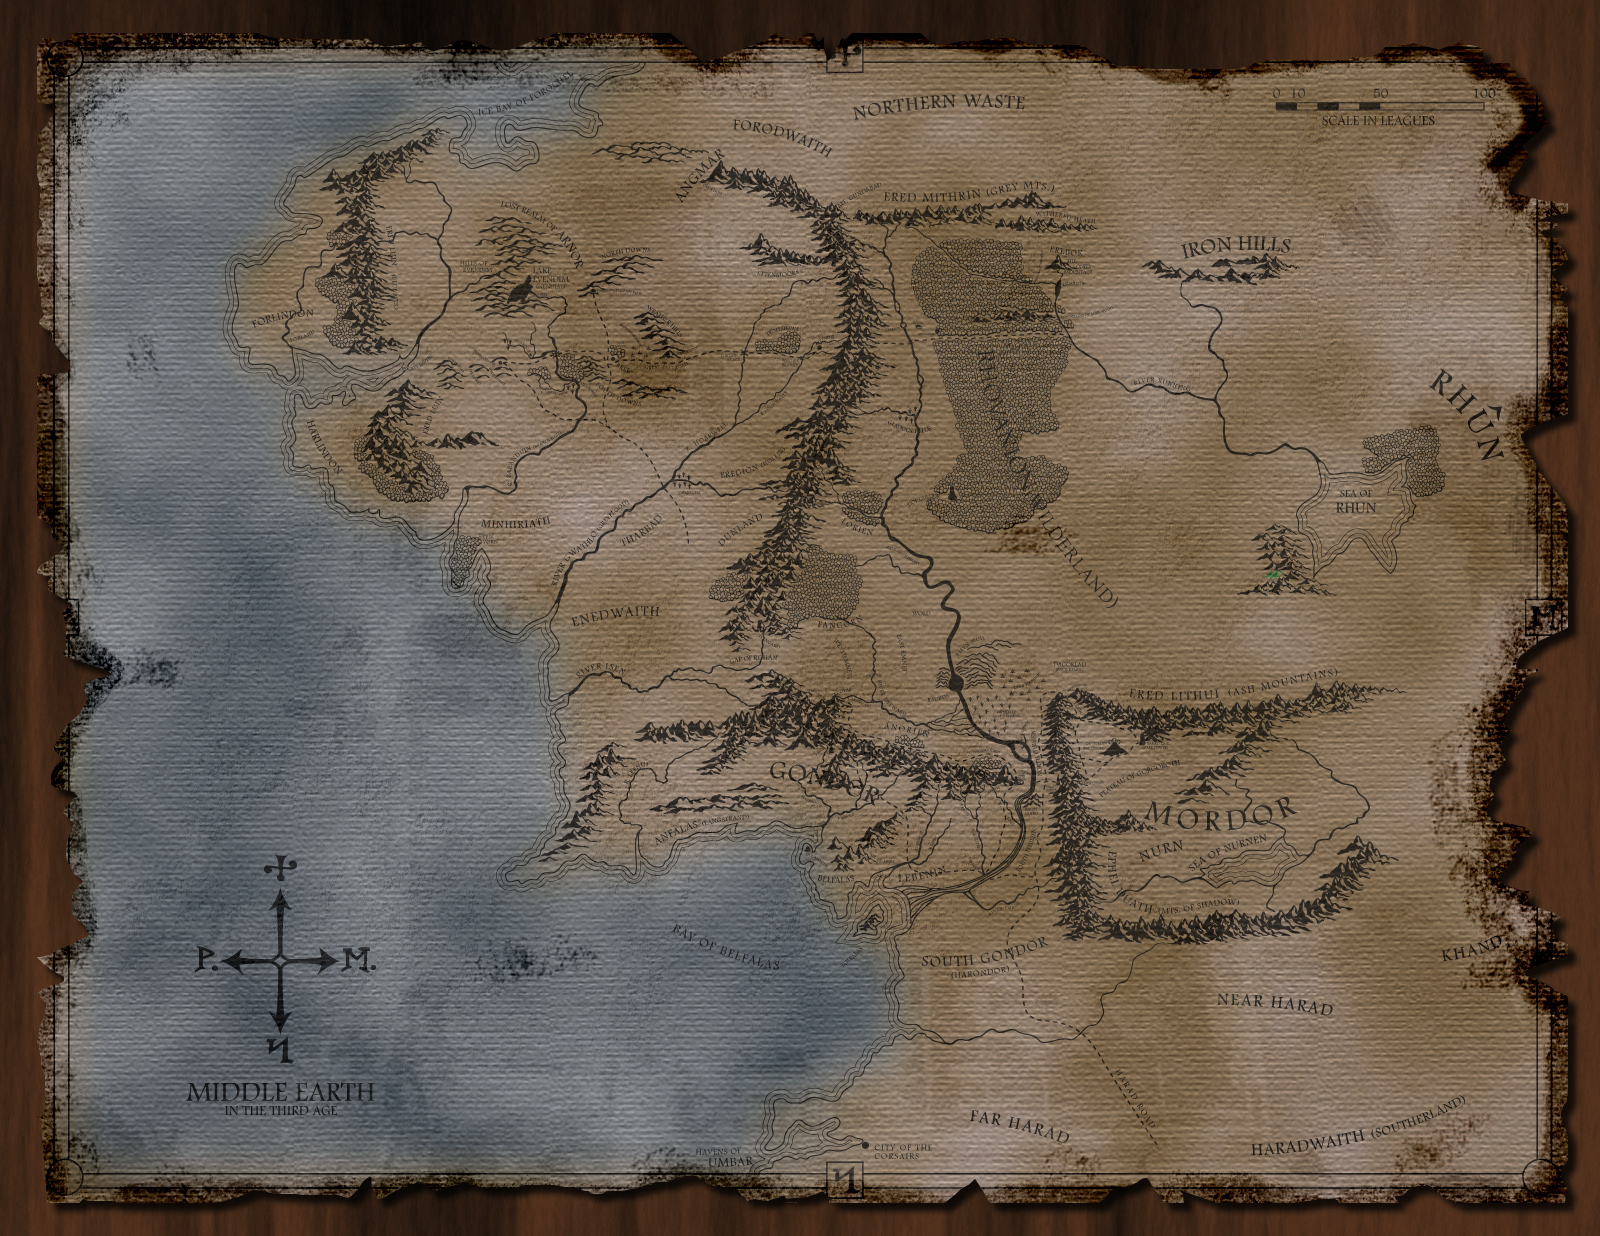  more like the middle earth map by middle earth map by arathael